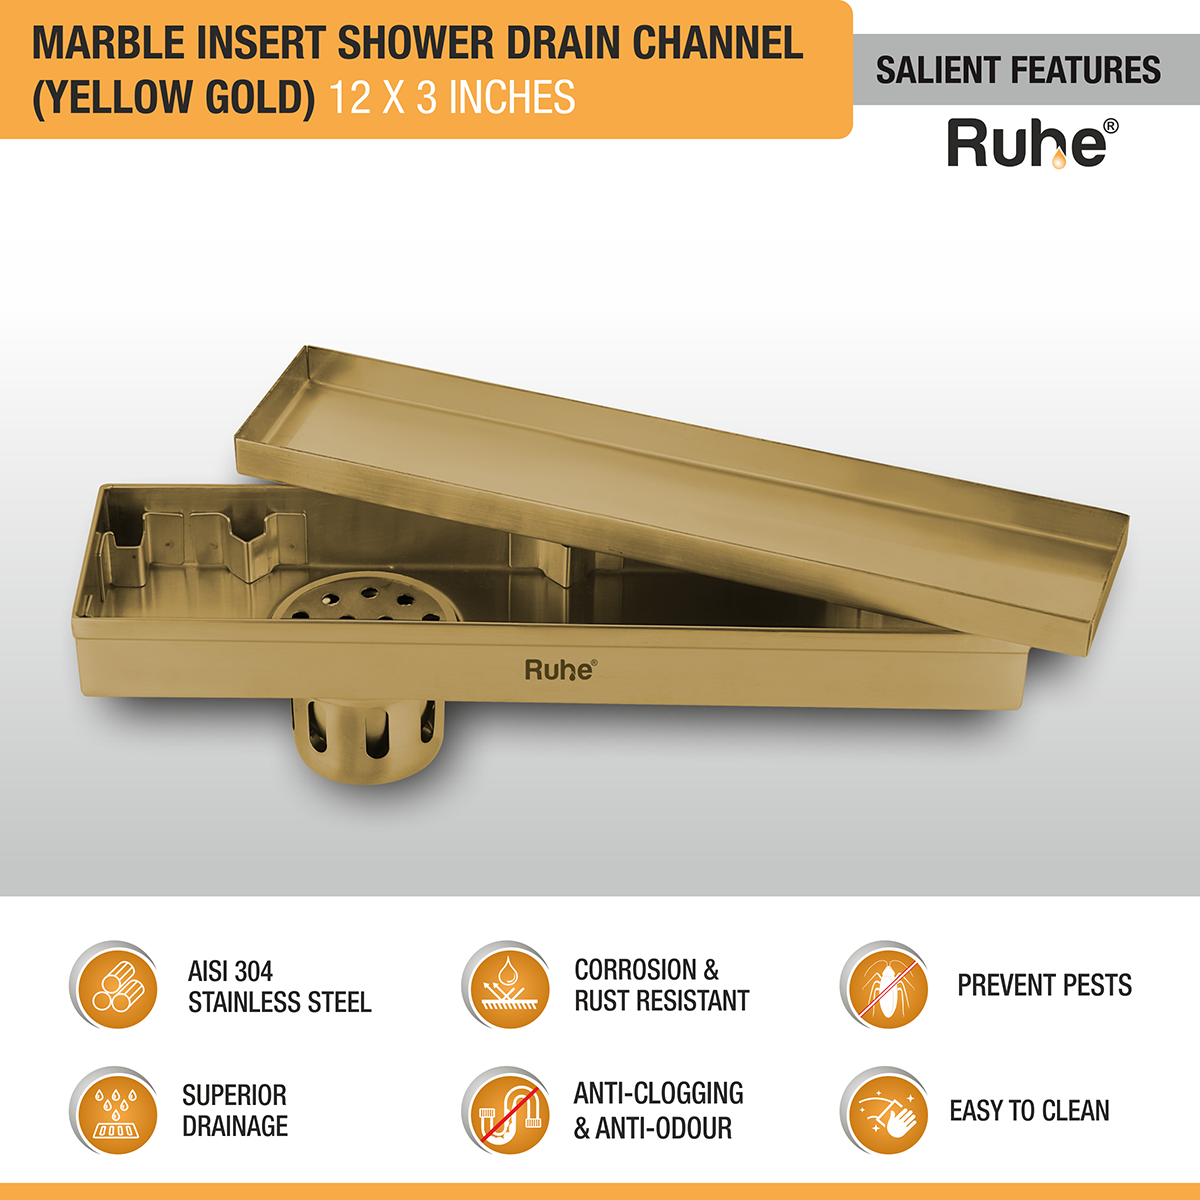 Marble Insert Shower Drain Channel (12 x 3 Inches) YELLOW GOLD PVD Coated features and benefits